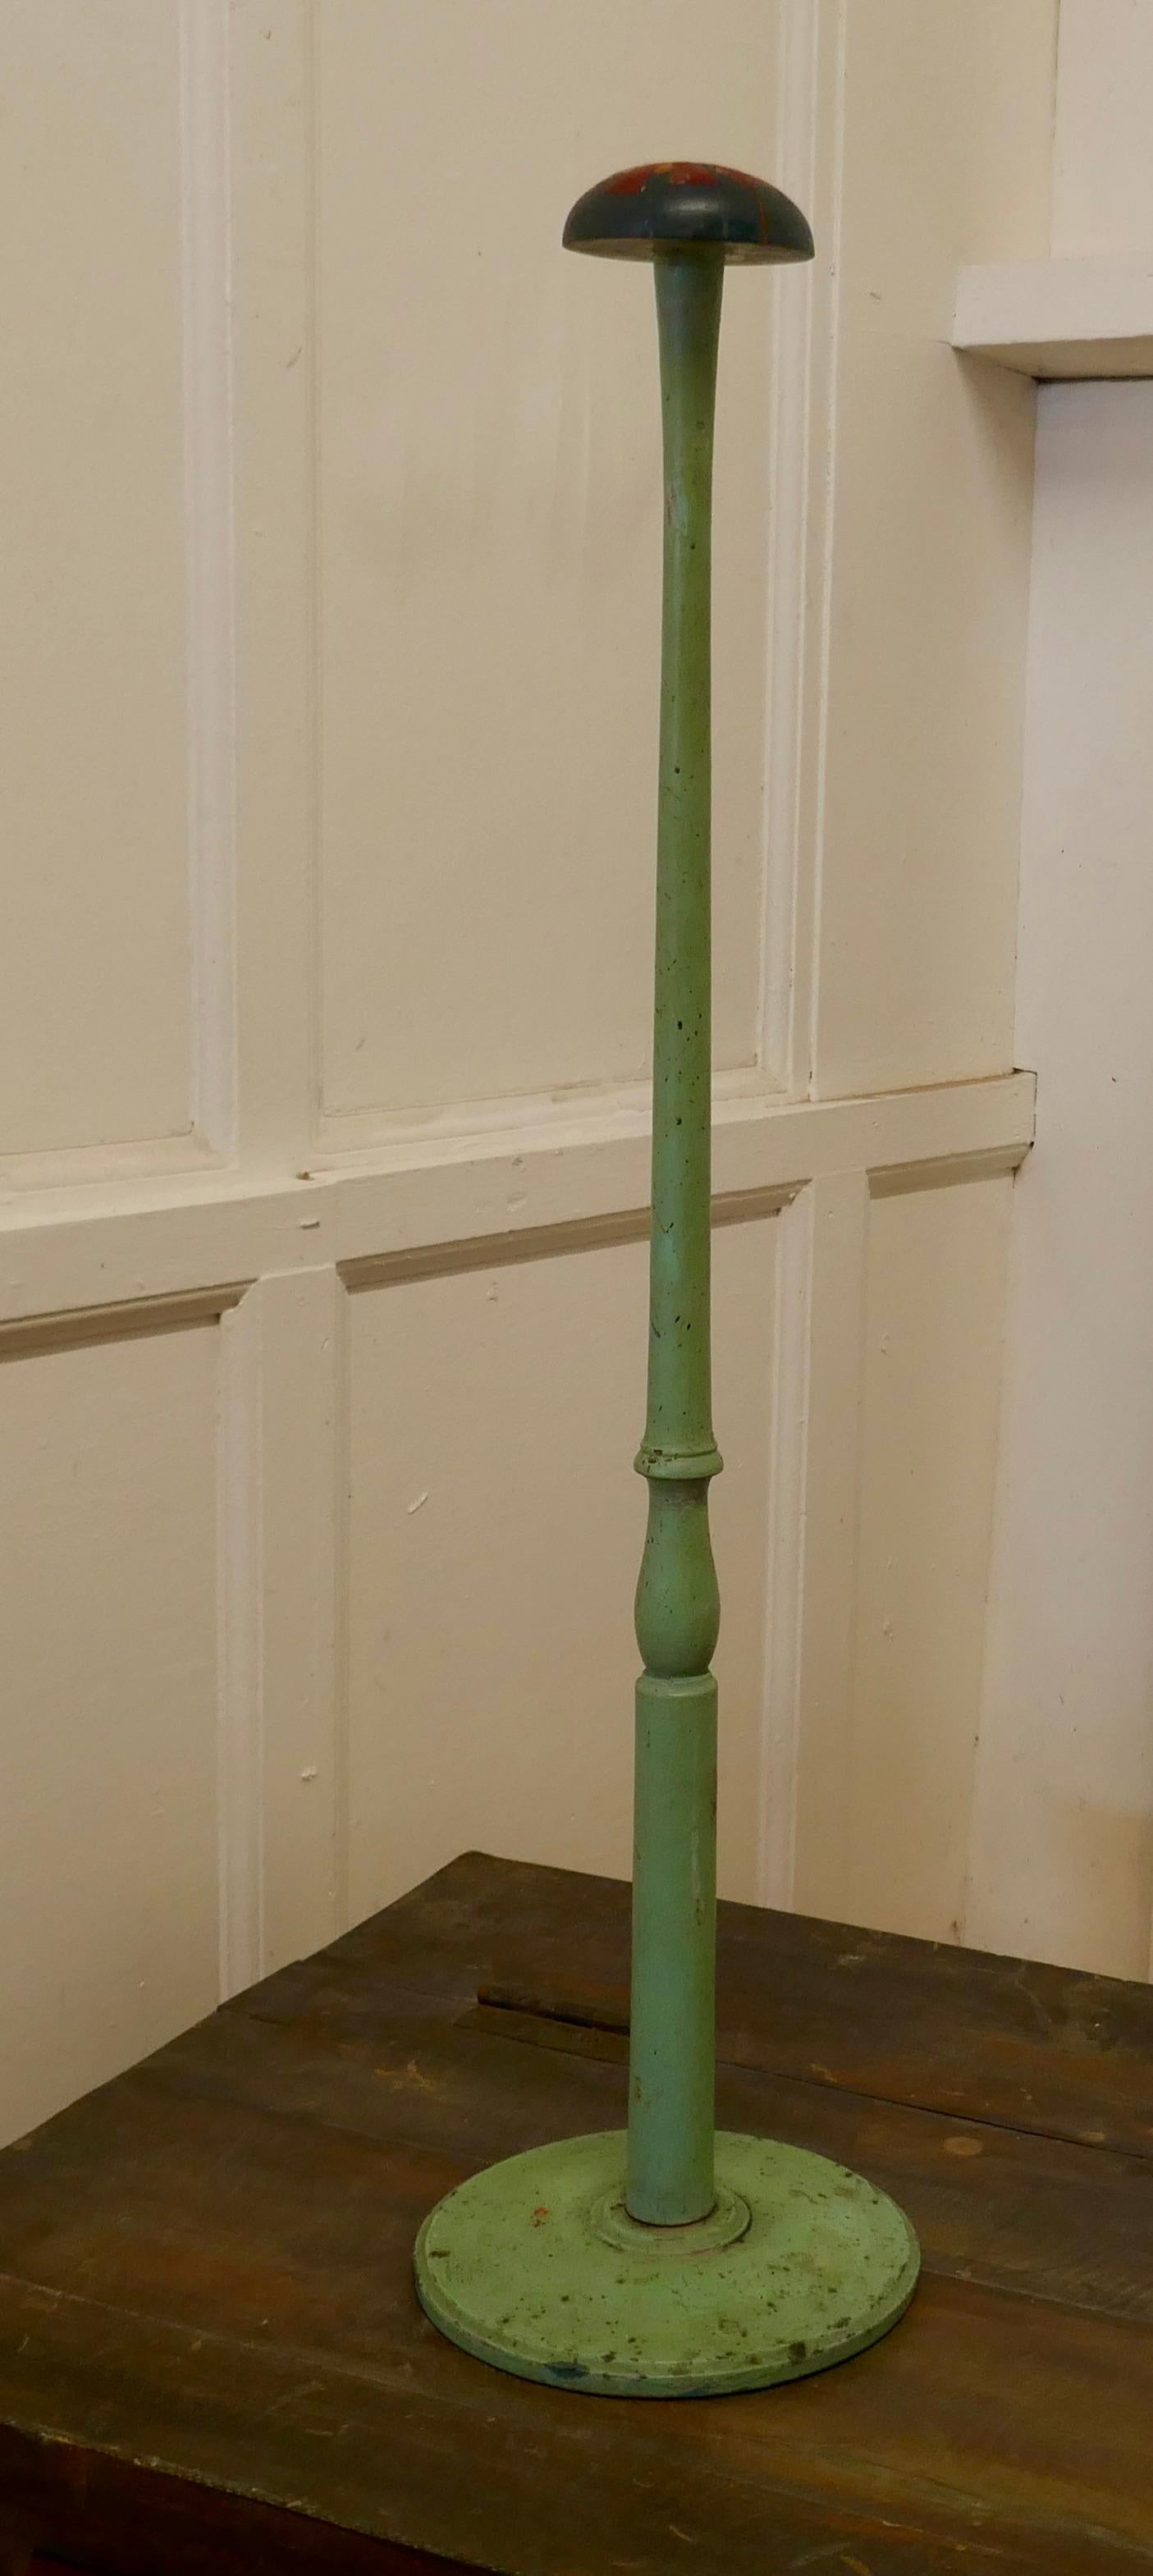 Very tall 19th century French Shabby original painted hat stand, shop display

The stand came from a milliners’ shop in France, it has a turned upright column set on a round turned base with a domed top rest
This one is in its original shady